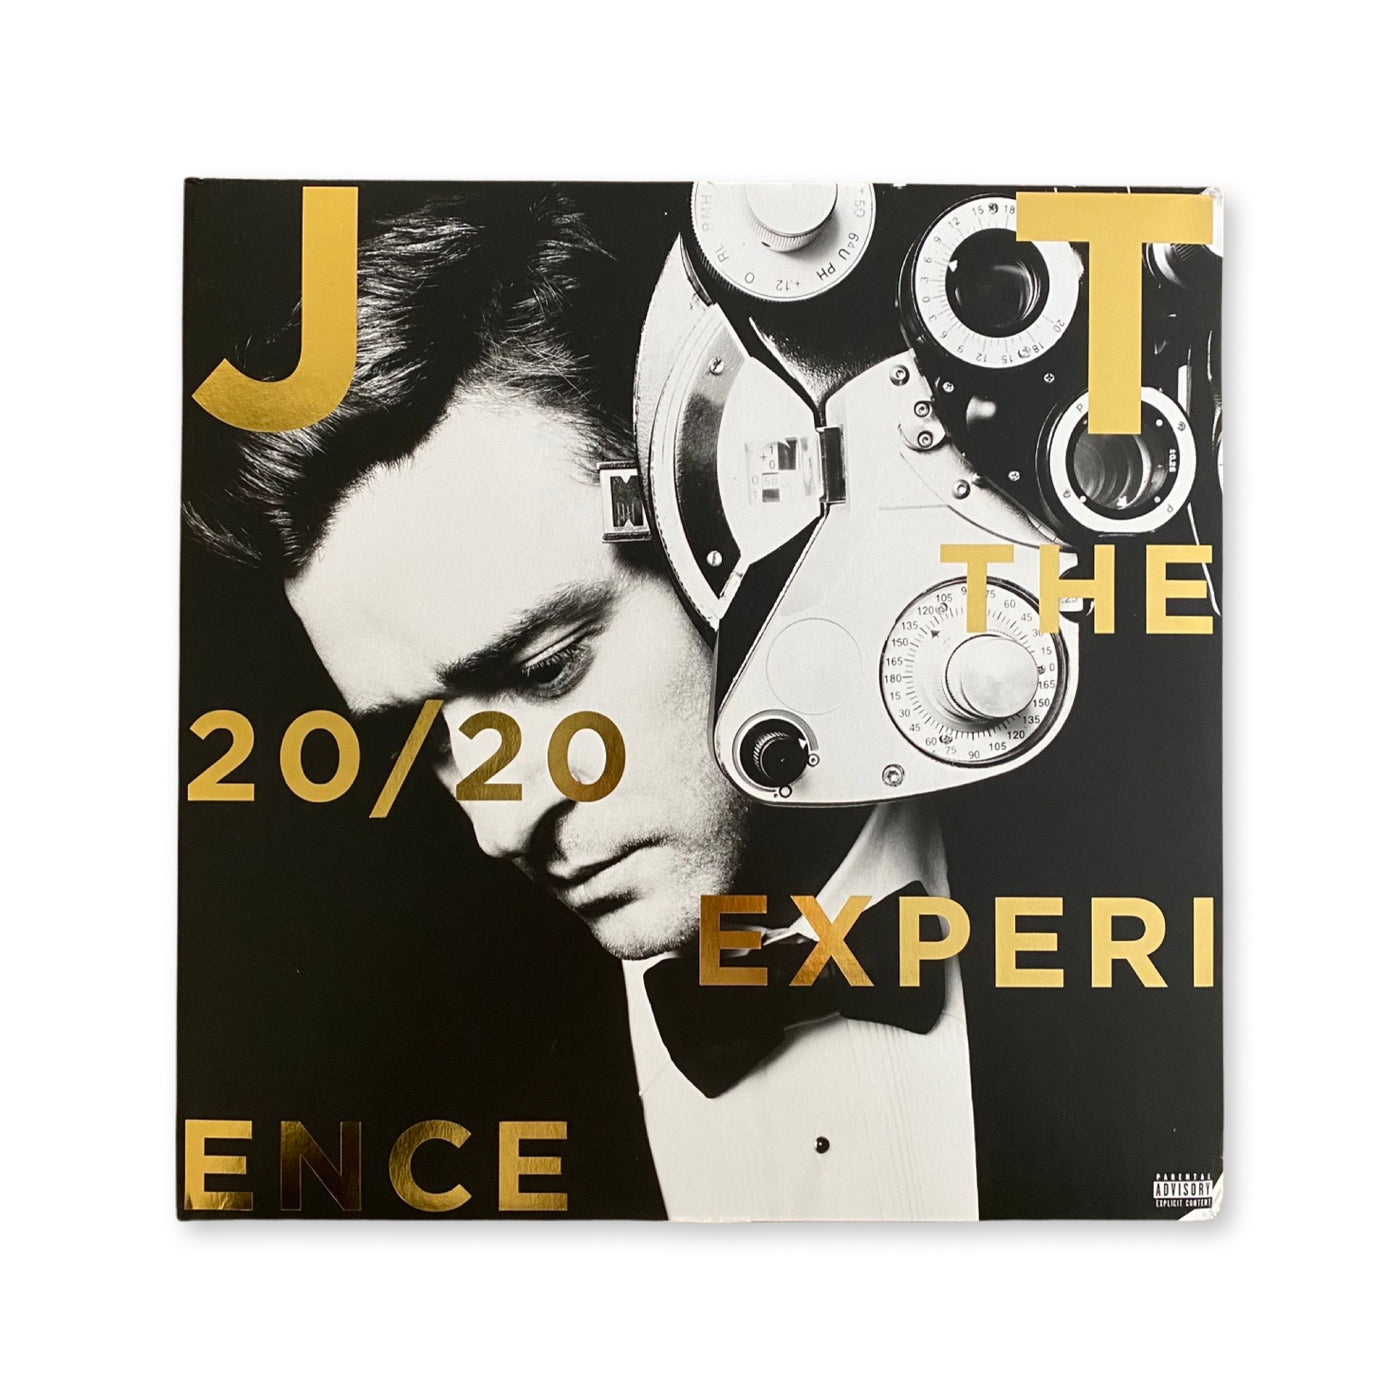 Justin Timberlake - The 20/20 Experience 2 Of 2